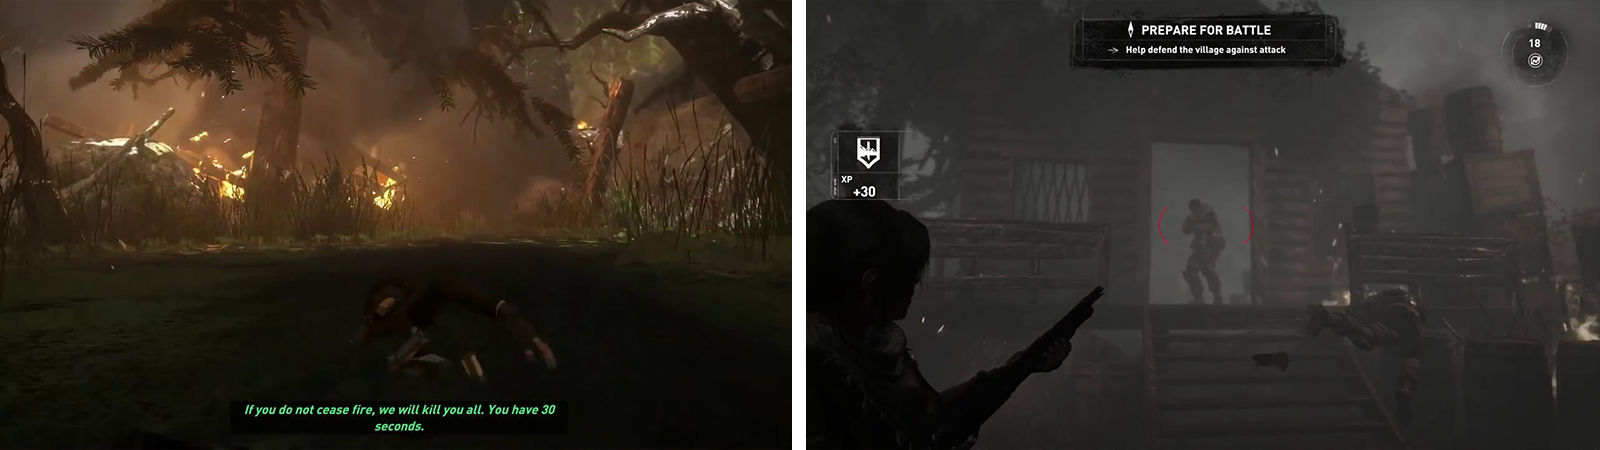 Work your way through the burning ruins (left) before fighting the enemies that appear as you enter the village (right).